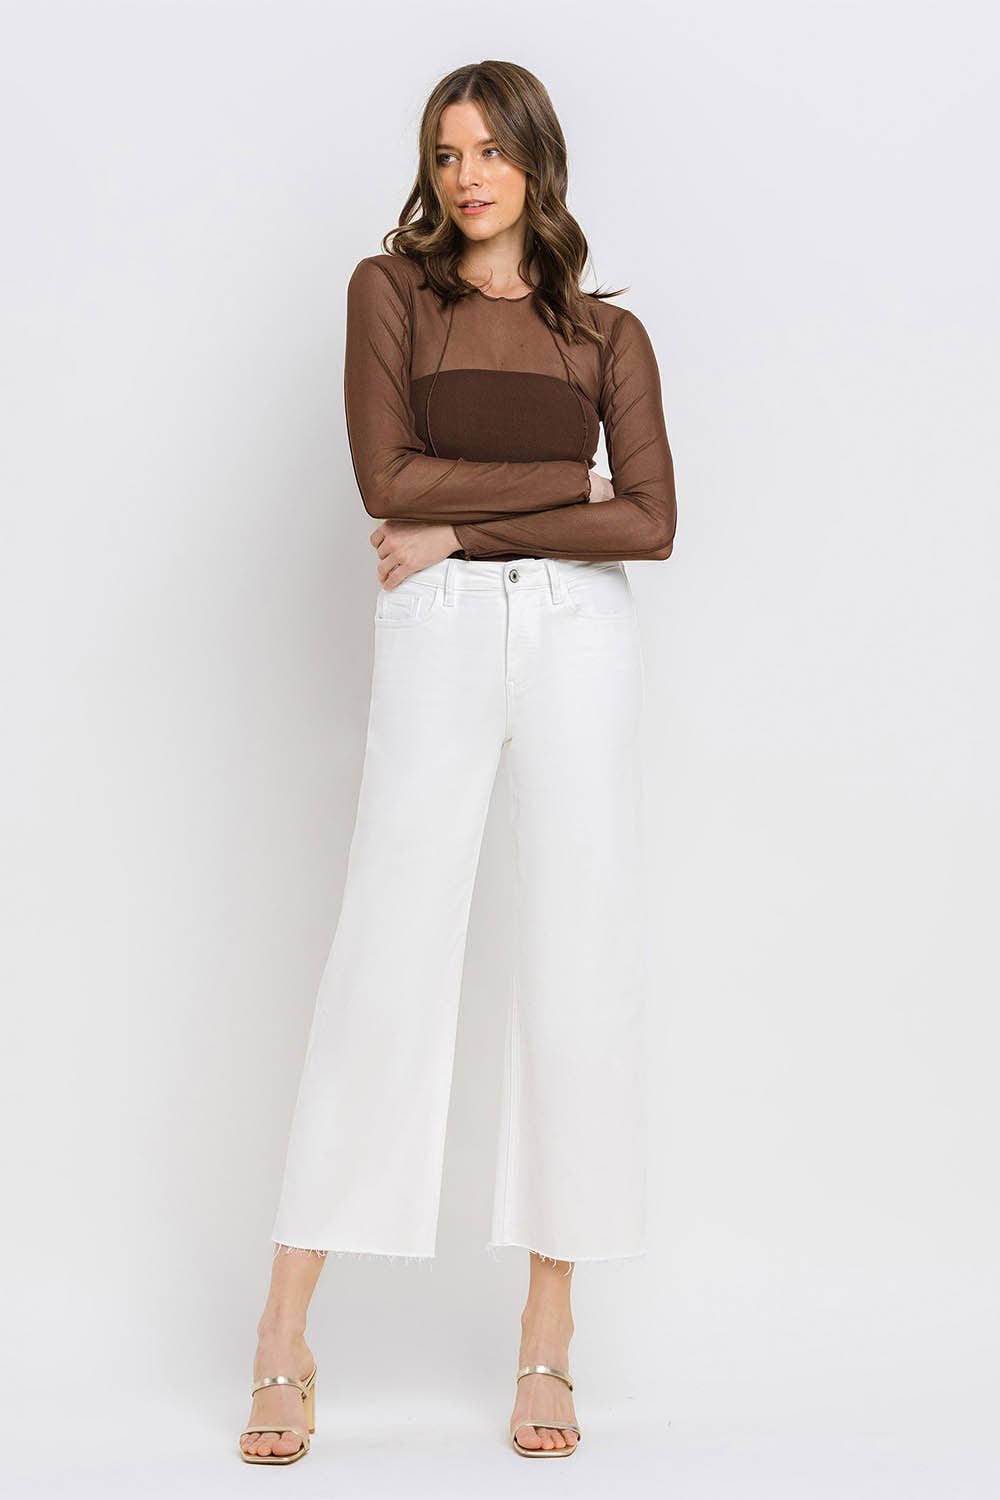 VERVET by FLYING MONKEY - HIGH RISE CROP WIDE LEG JEANS T5894WH: OPTIC WHITE / 27